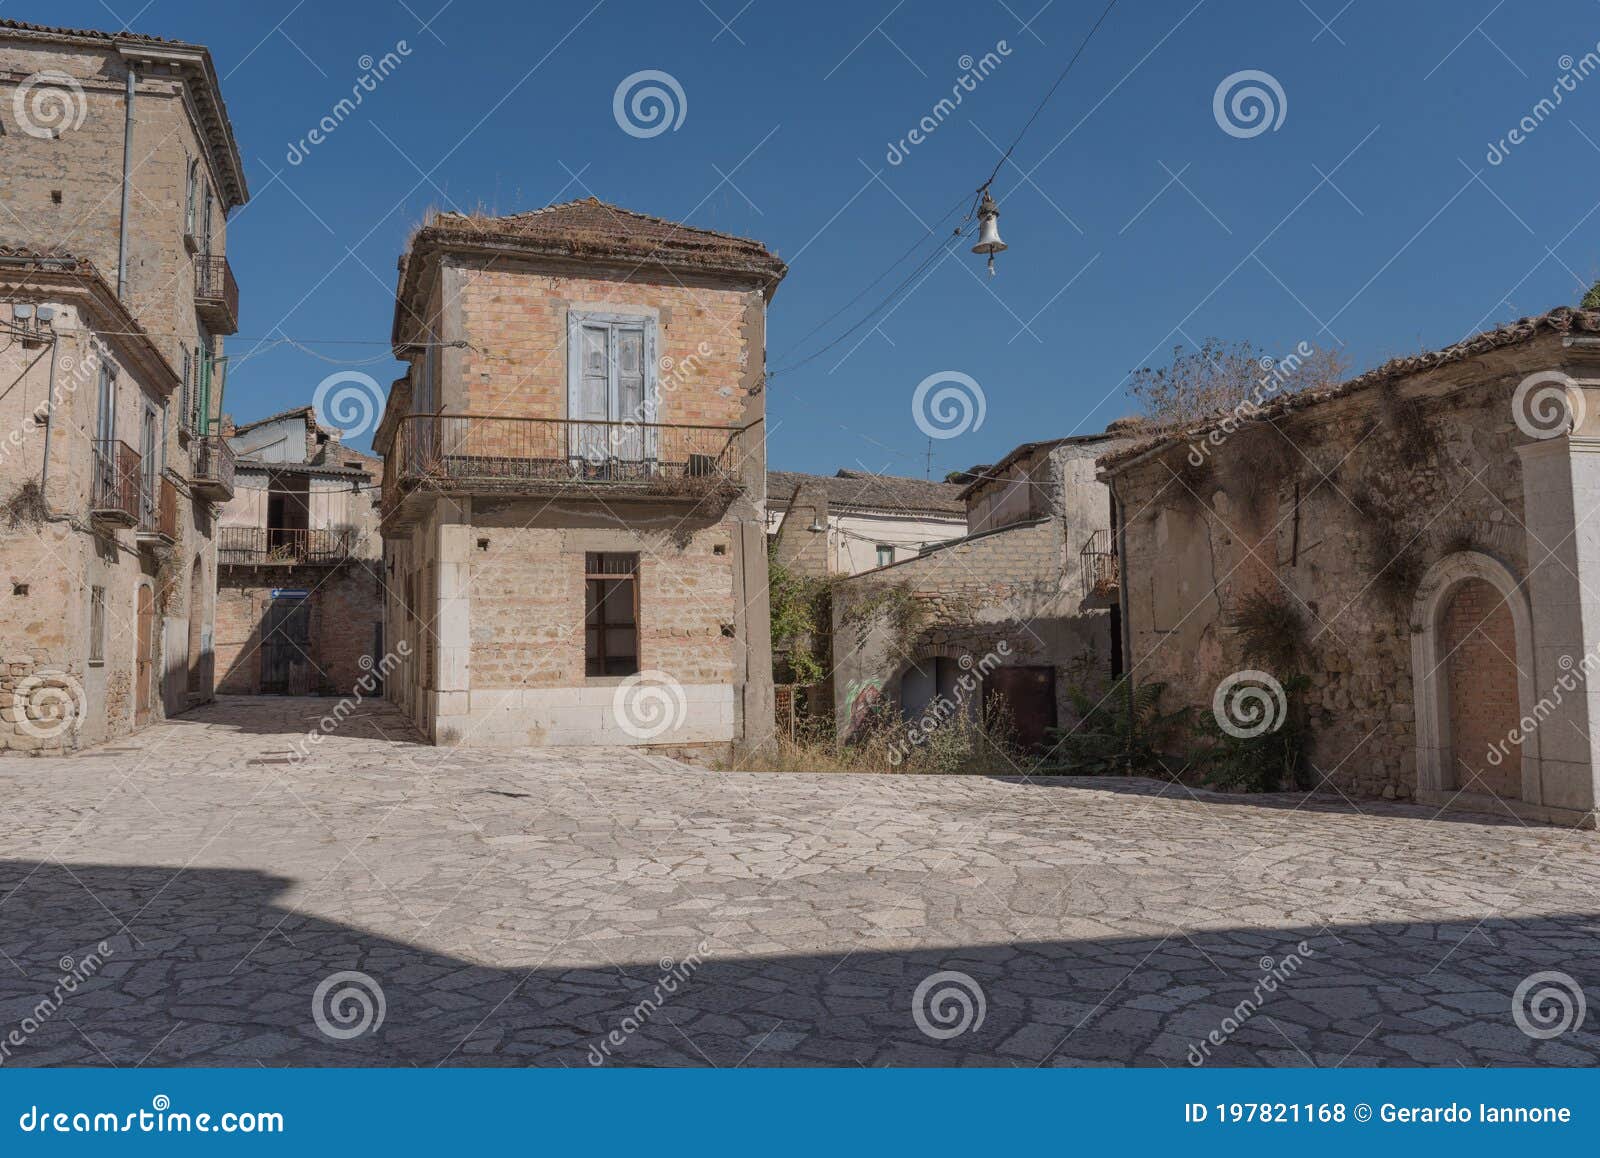 apice vecchio, a small ghost town in the province of benevento. wretched houses, collapsed buildings, closed and empty squares.